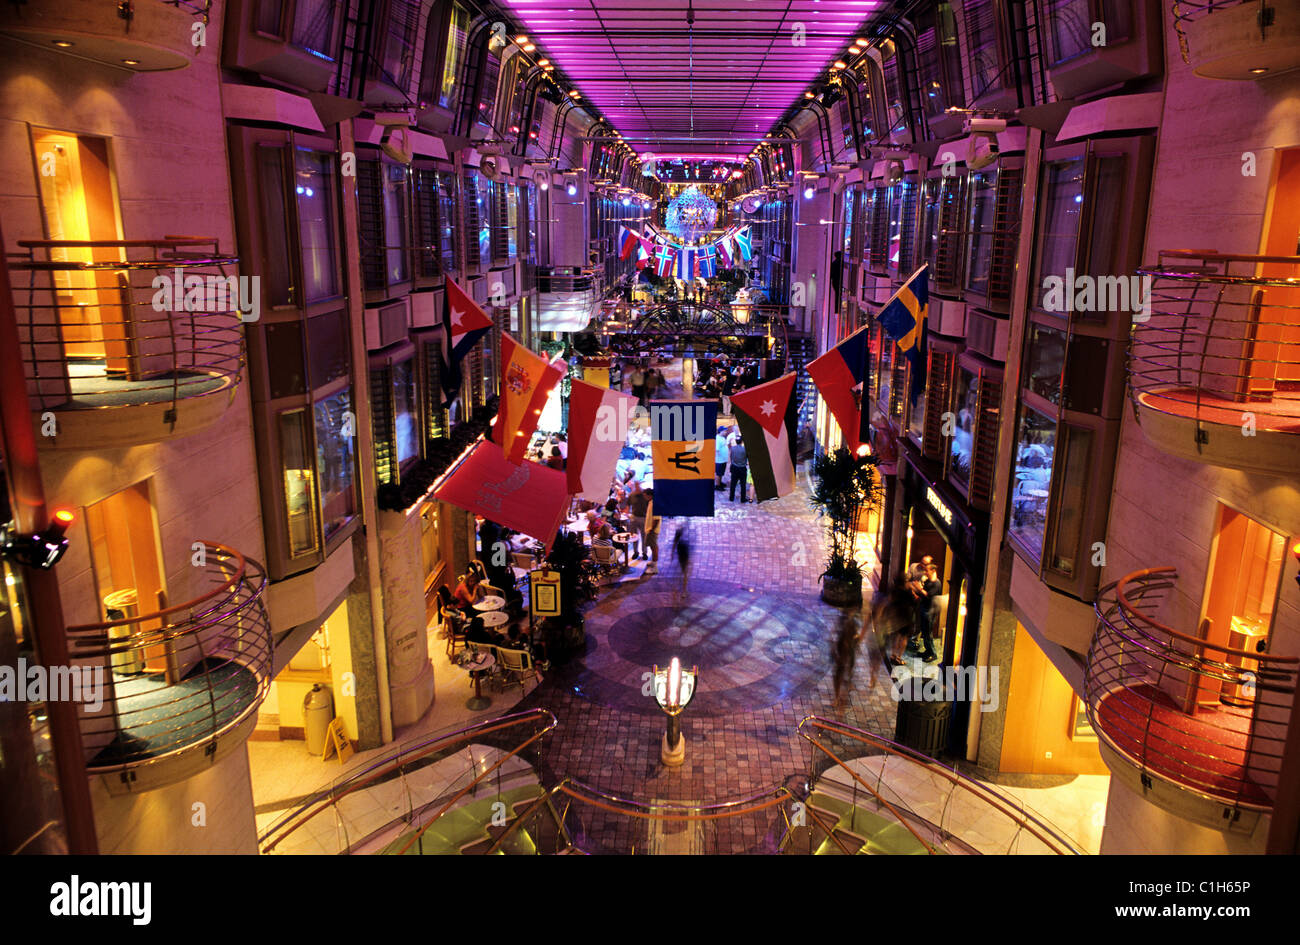 Royal mall ship hi-res stock photography and images - Alamy